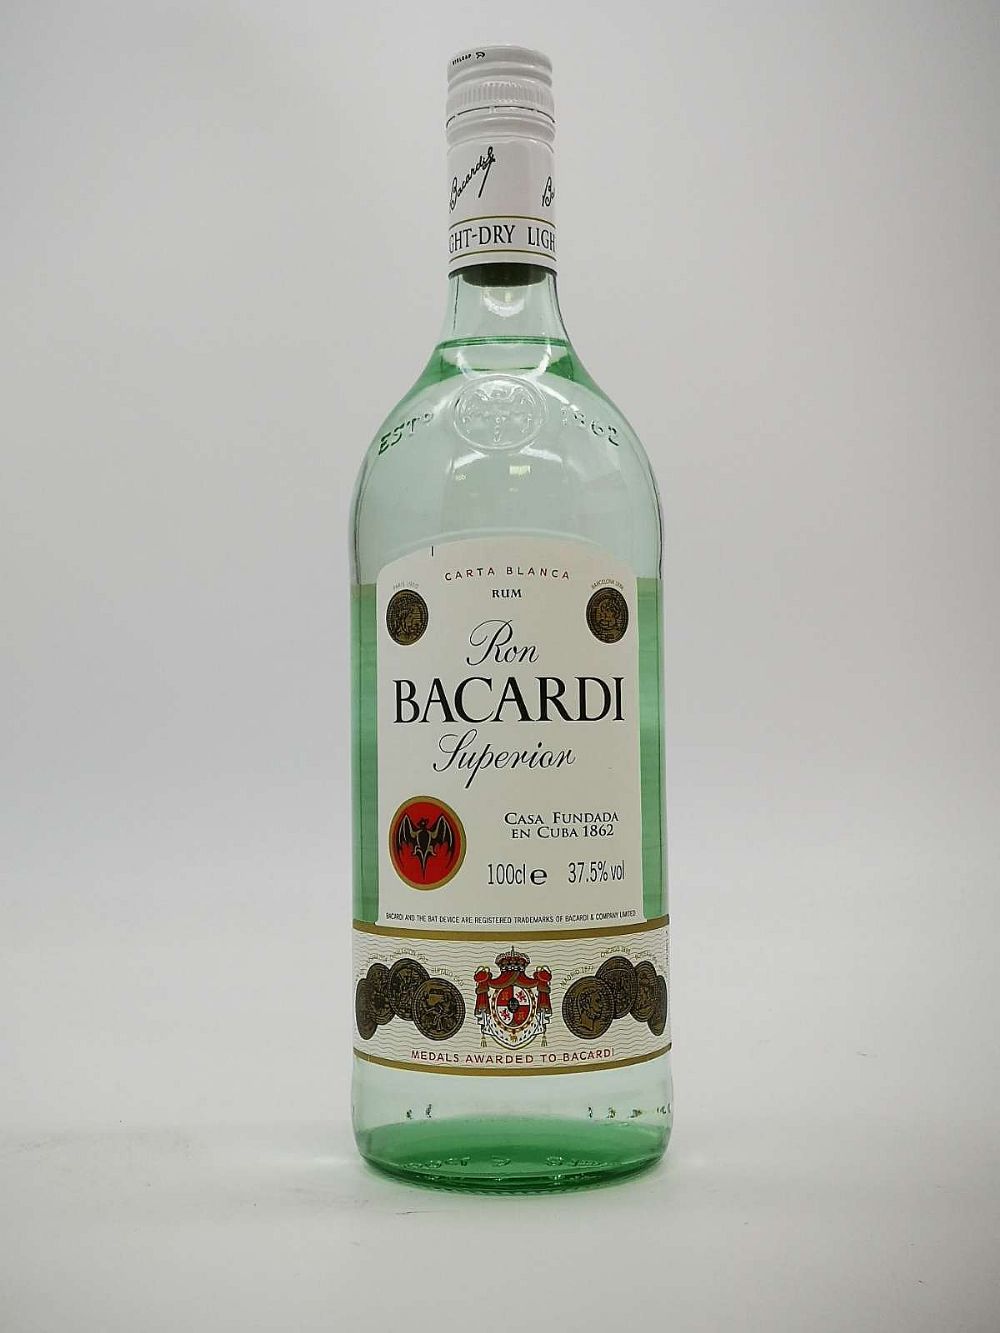 Bacardi Litre Presentation Pack with 4 branded glasses and cocktail stirrers